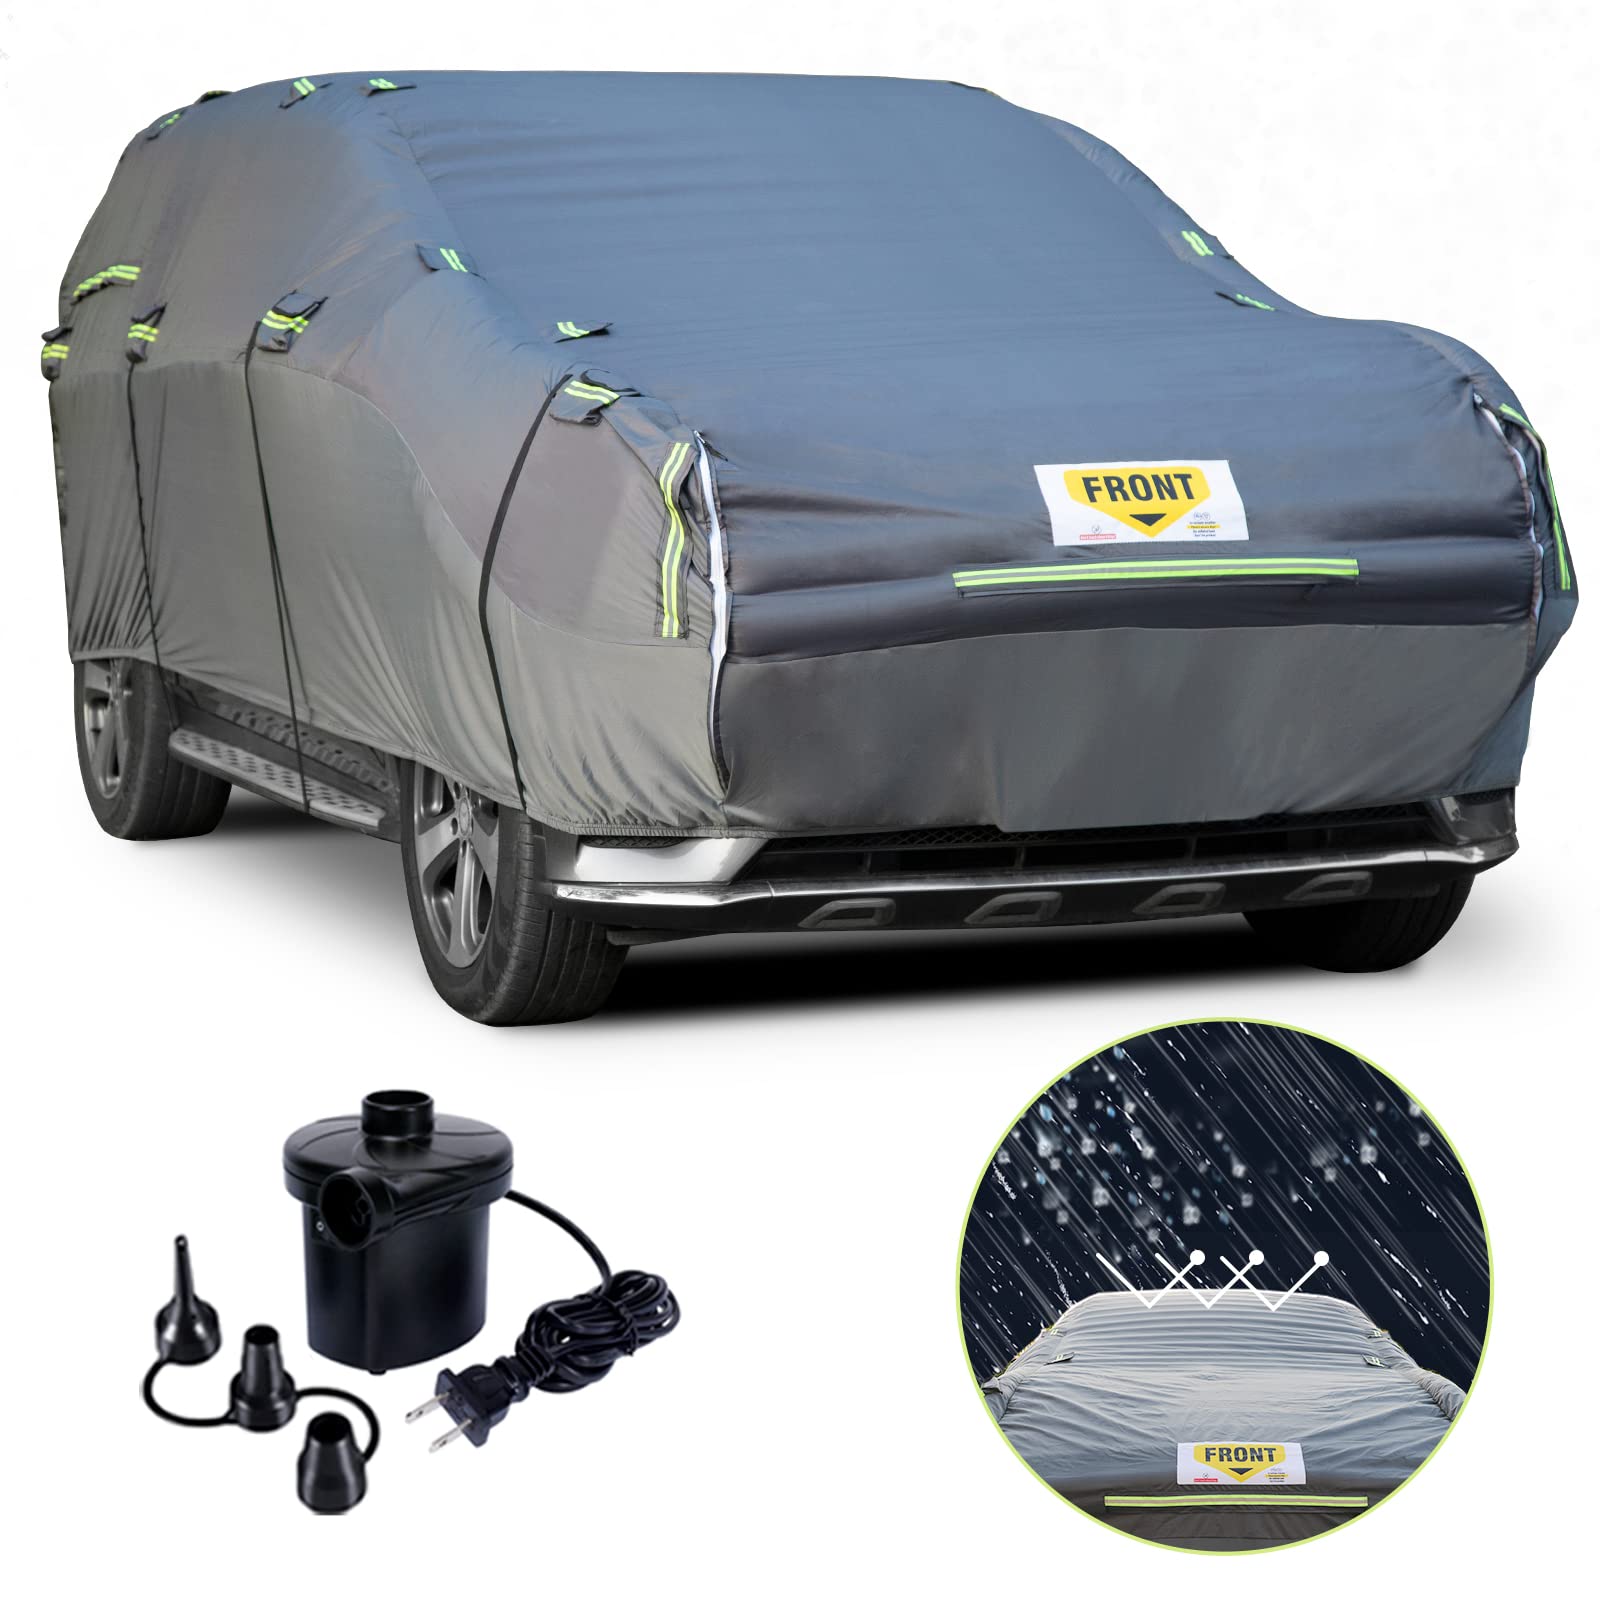 Car Covers to Protect from Hail